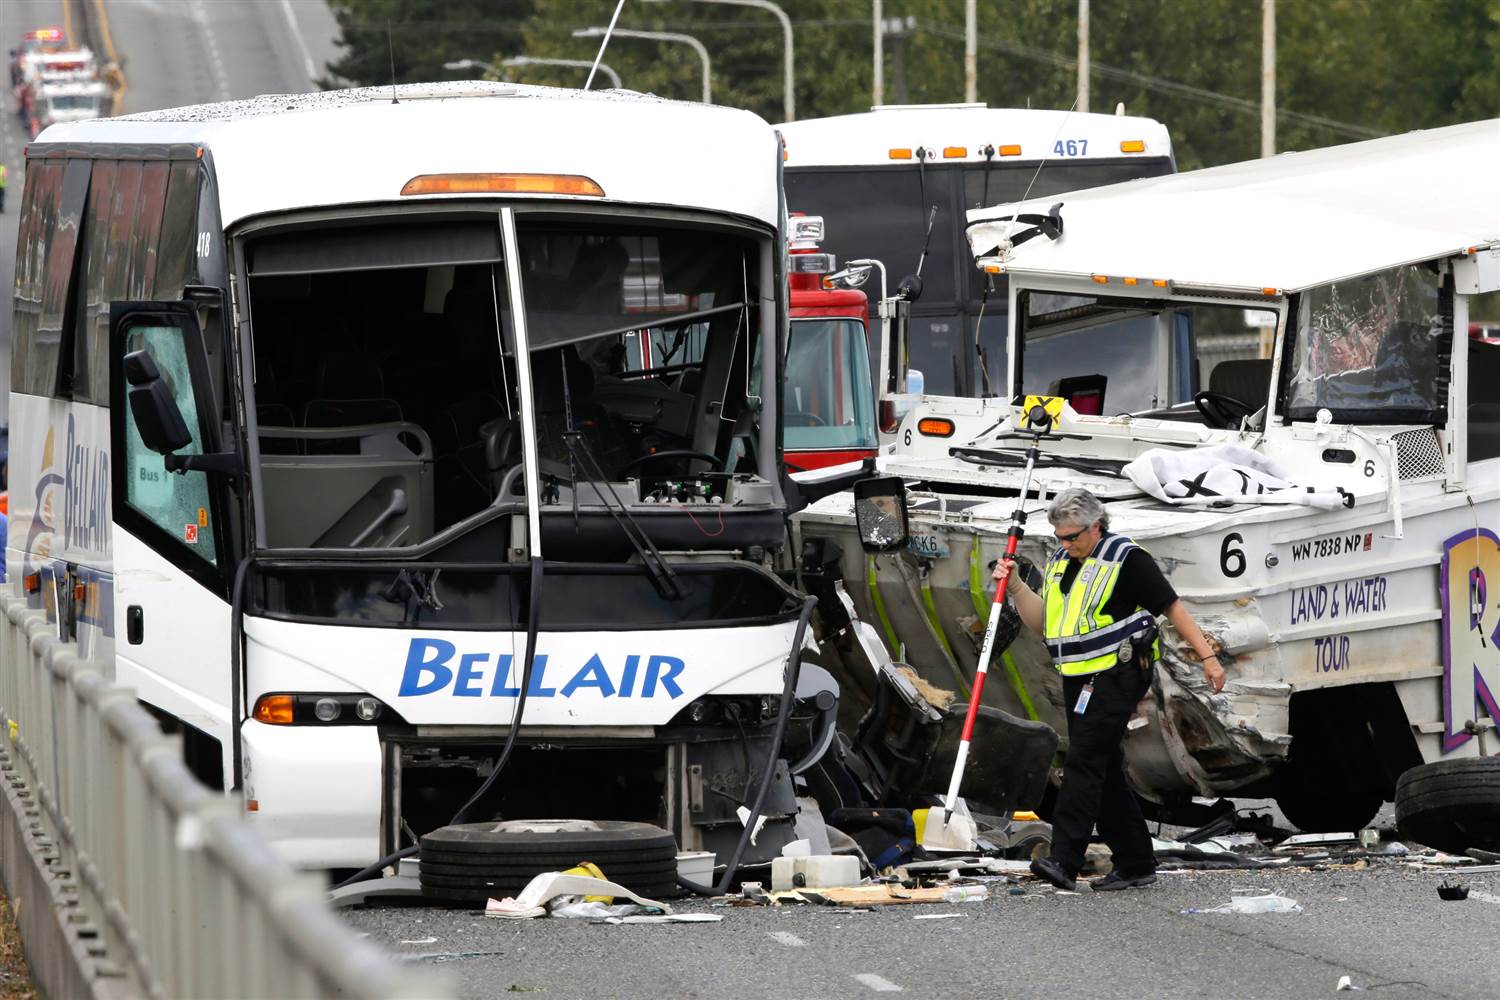 “Ride the Ducks” Collision Leaves Many Injured, Four Dead